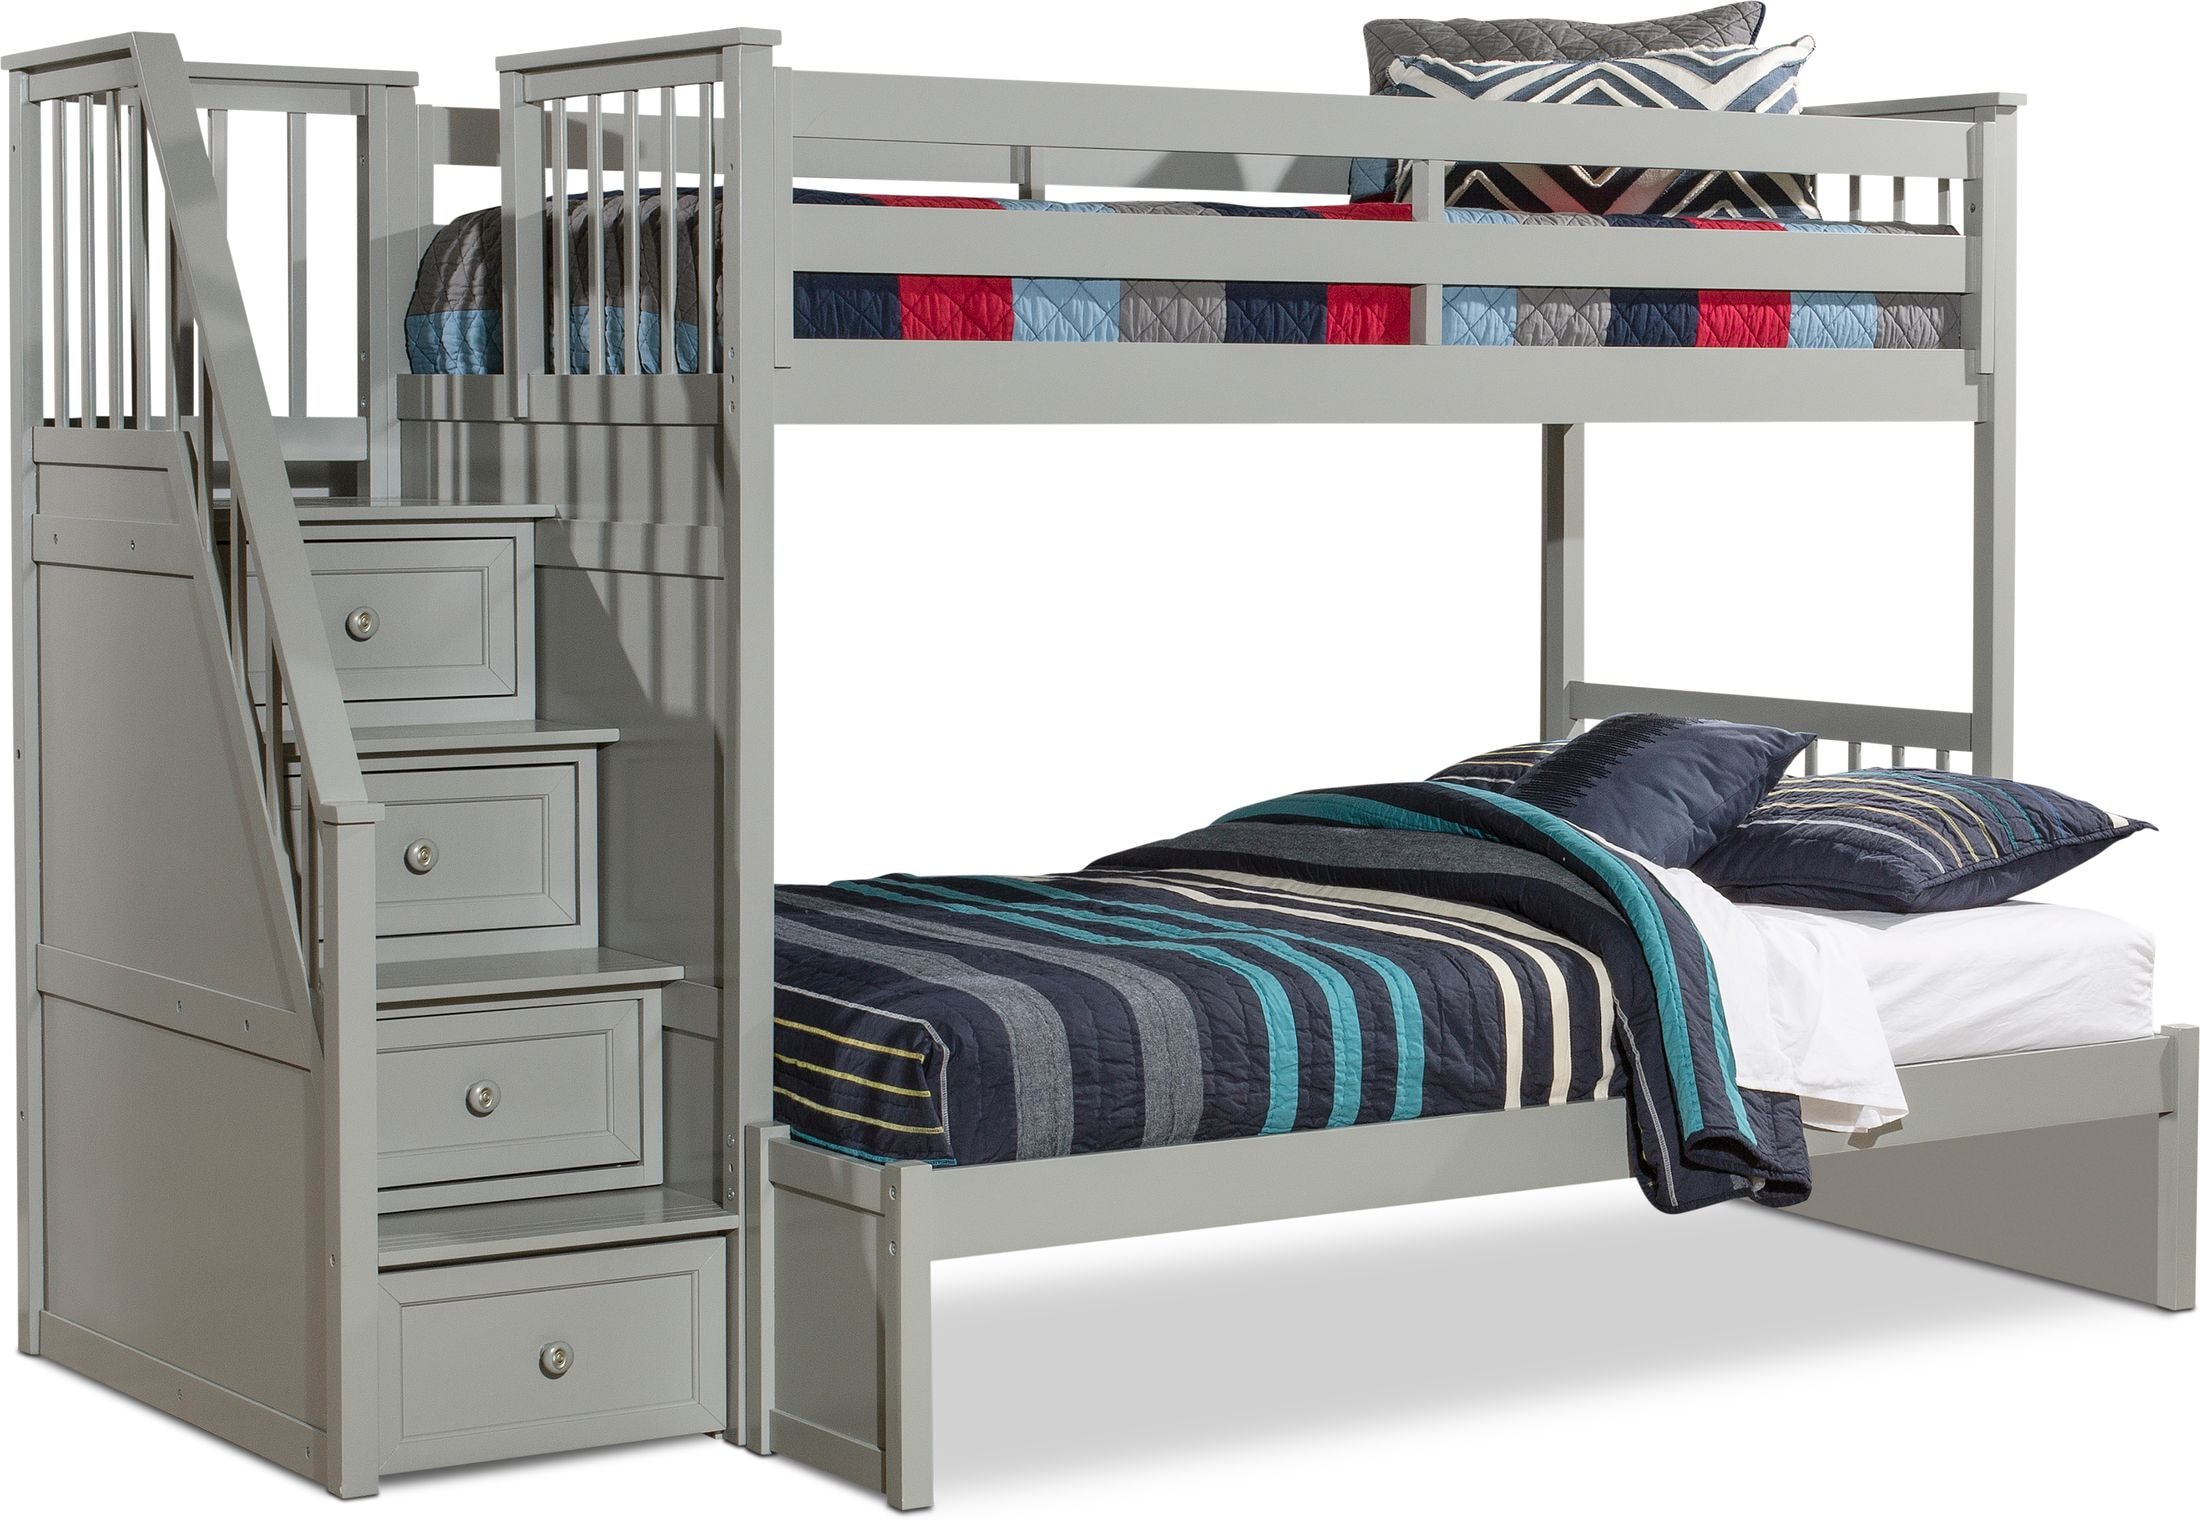 Undefined Value City Furniture, Bunk Beds Financing Available